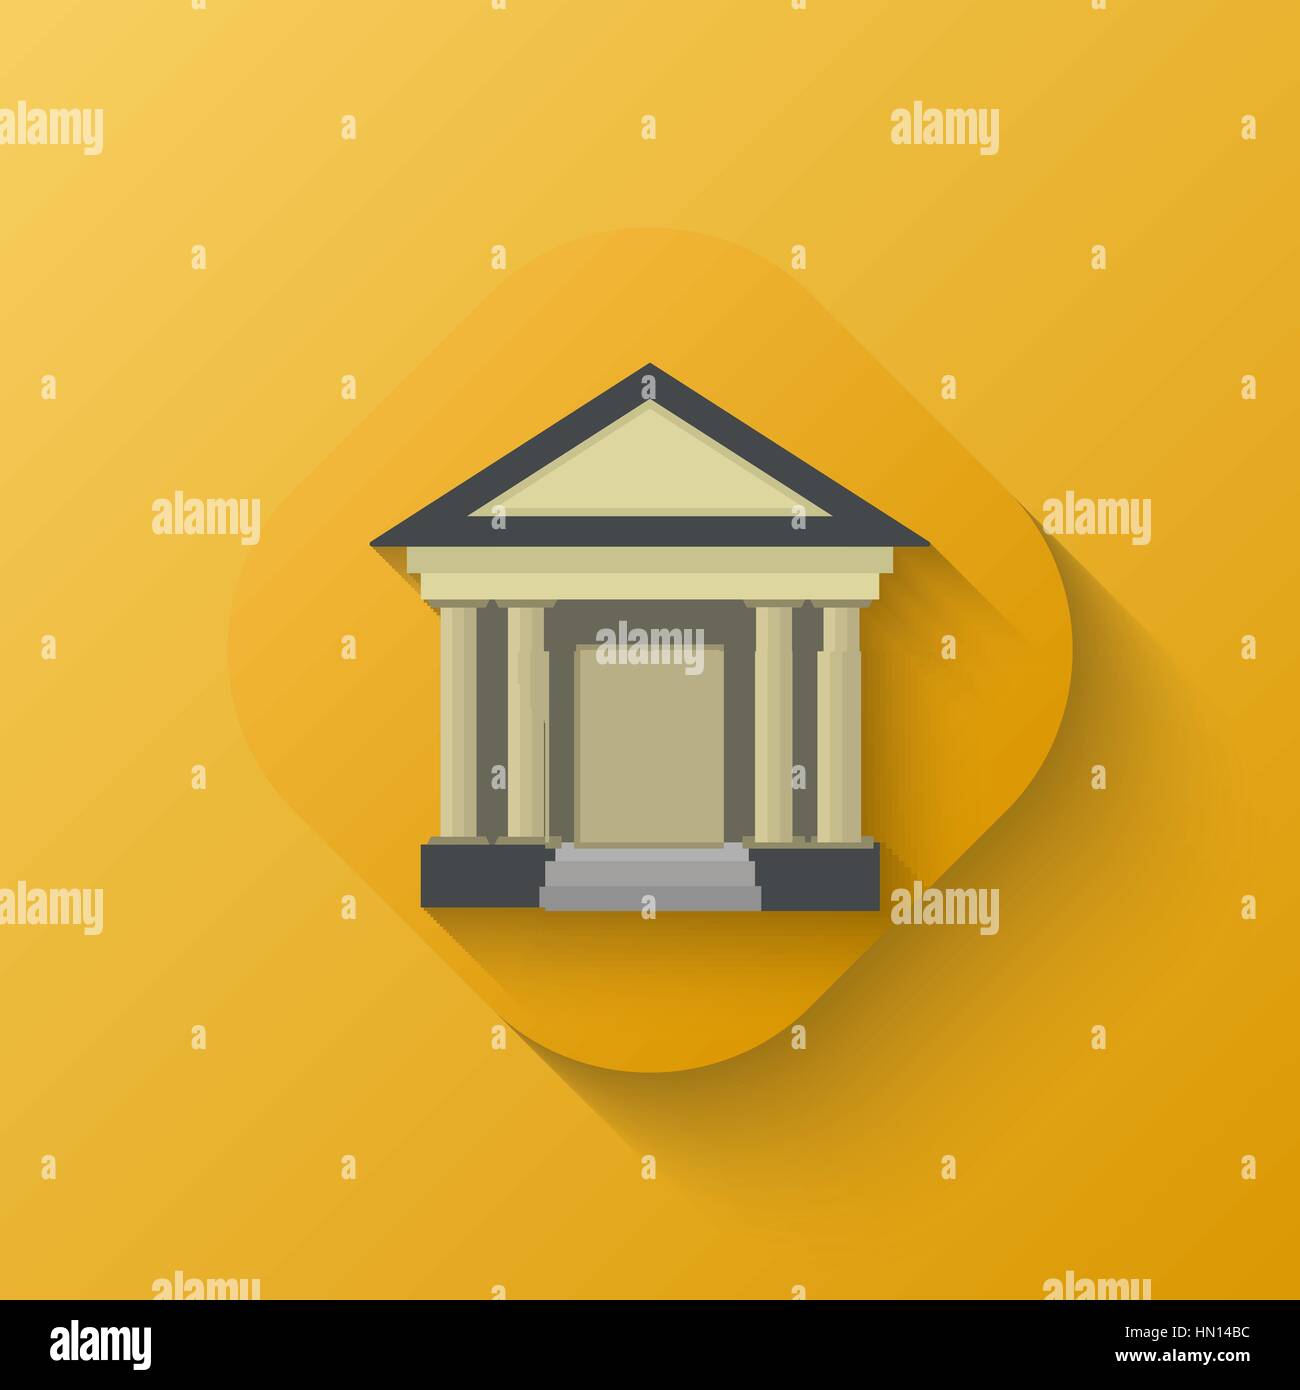 Court house icon. Yellow. Flat. Shadow. Vector illustration for your design Stock Vector